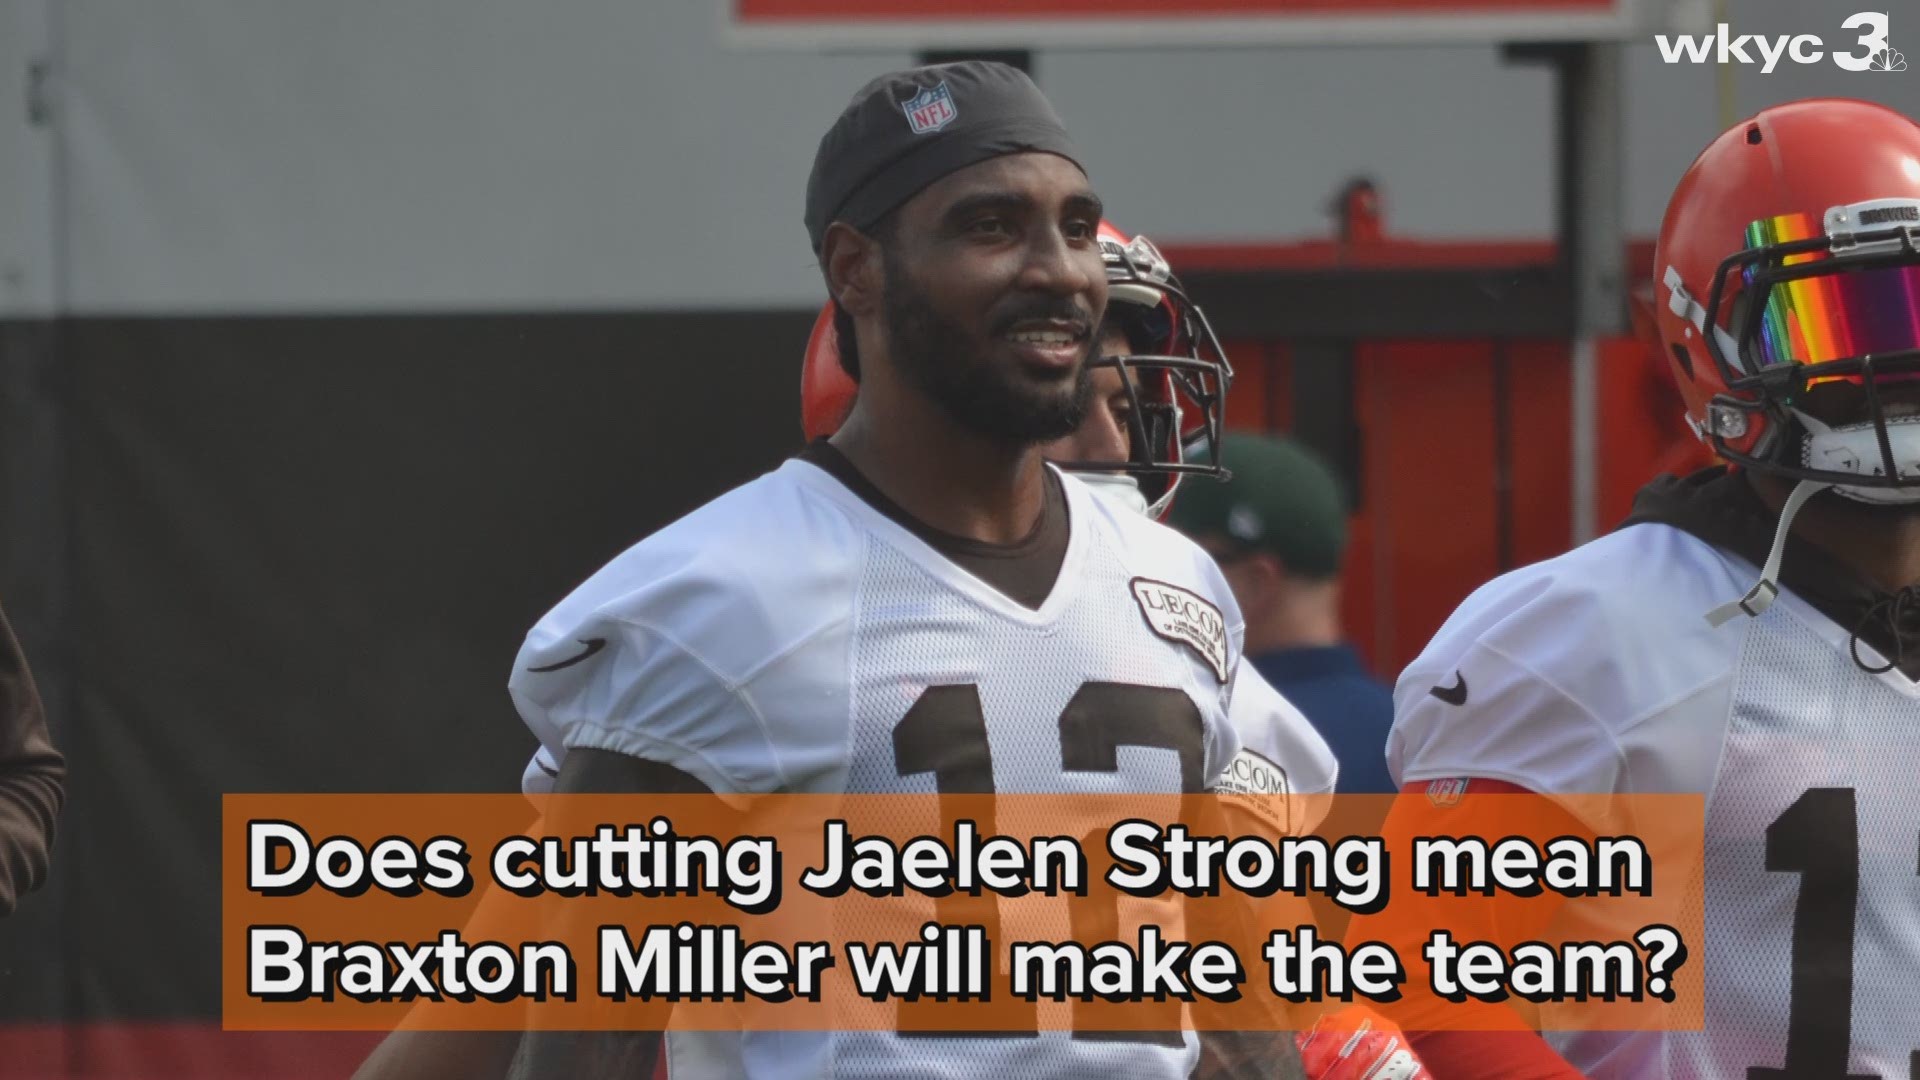 On Tuesday, the Cleveland Browns announced they have waived wide receiver Jaelen Strong, potentially opening the door for the team to keep Braxton Miller.  Final cuts are Saturday by 4:00 pm.